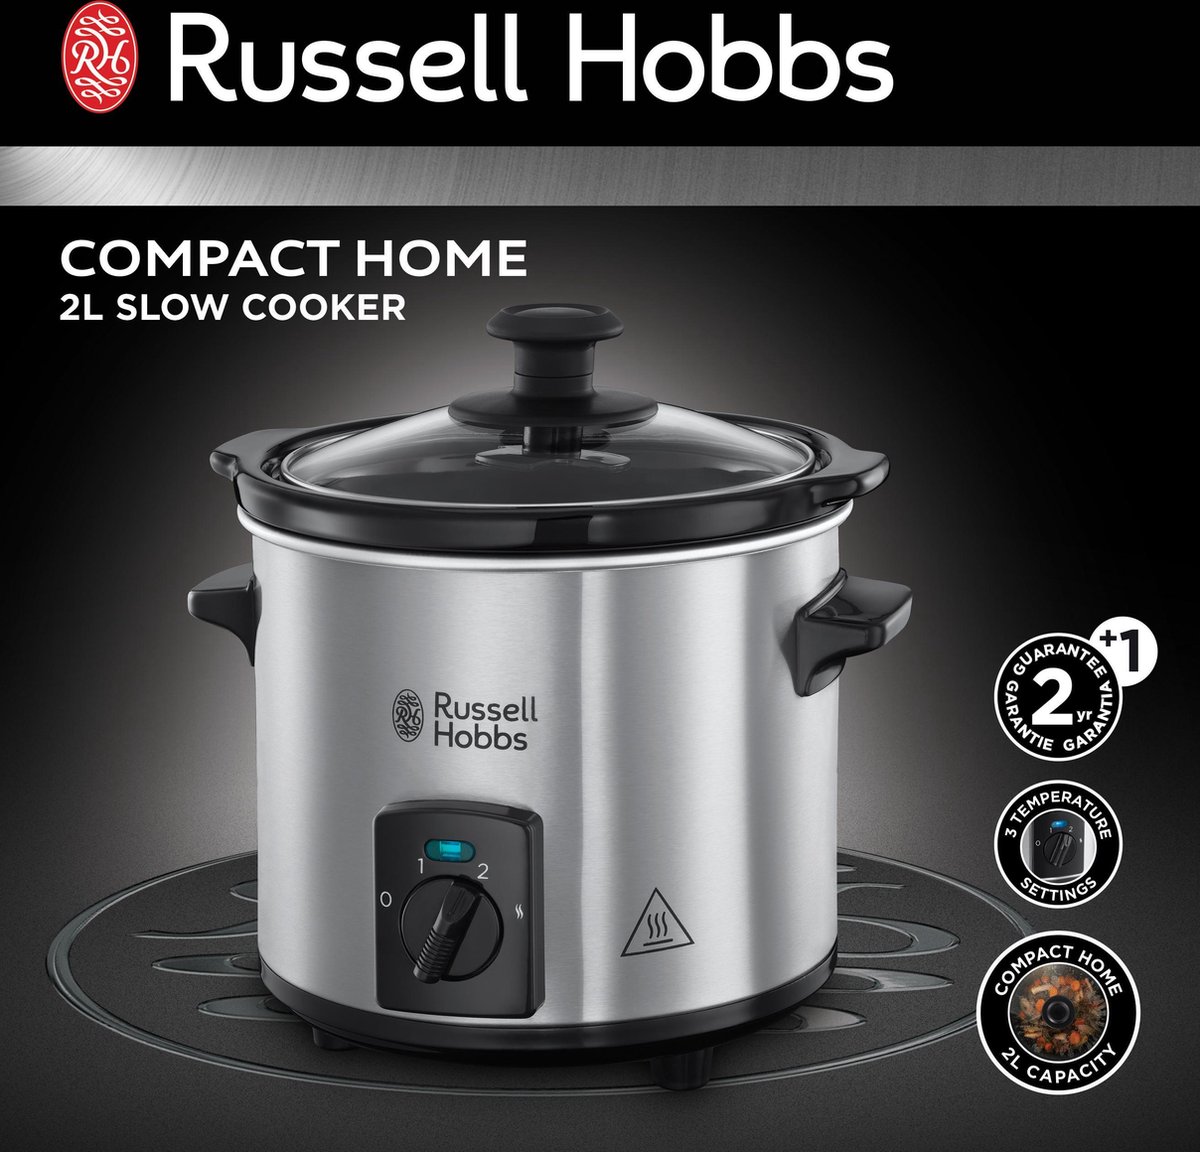 Hobbs Compact | 2L Slowcooker 25570-56 Home bol Russell